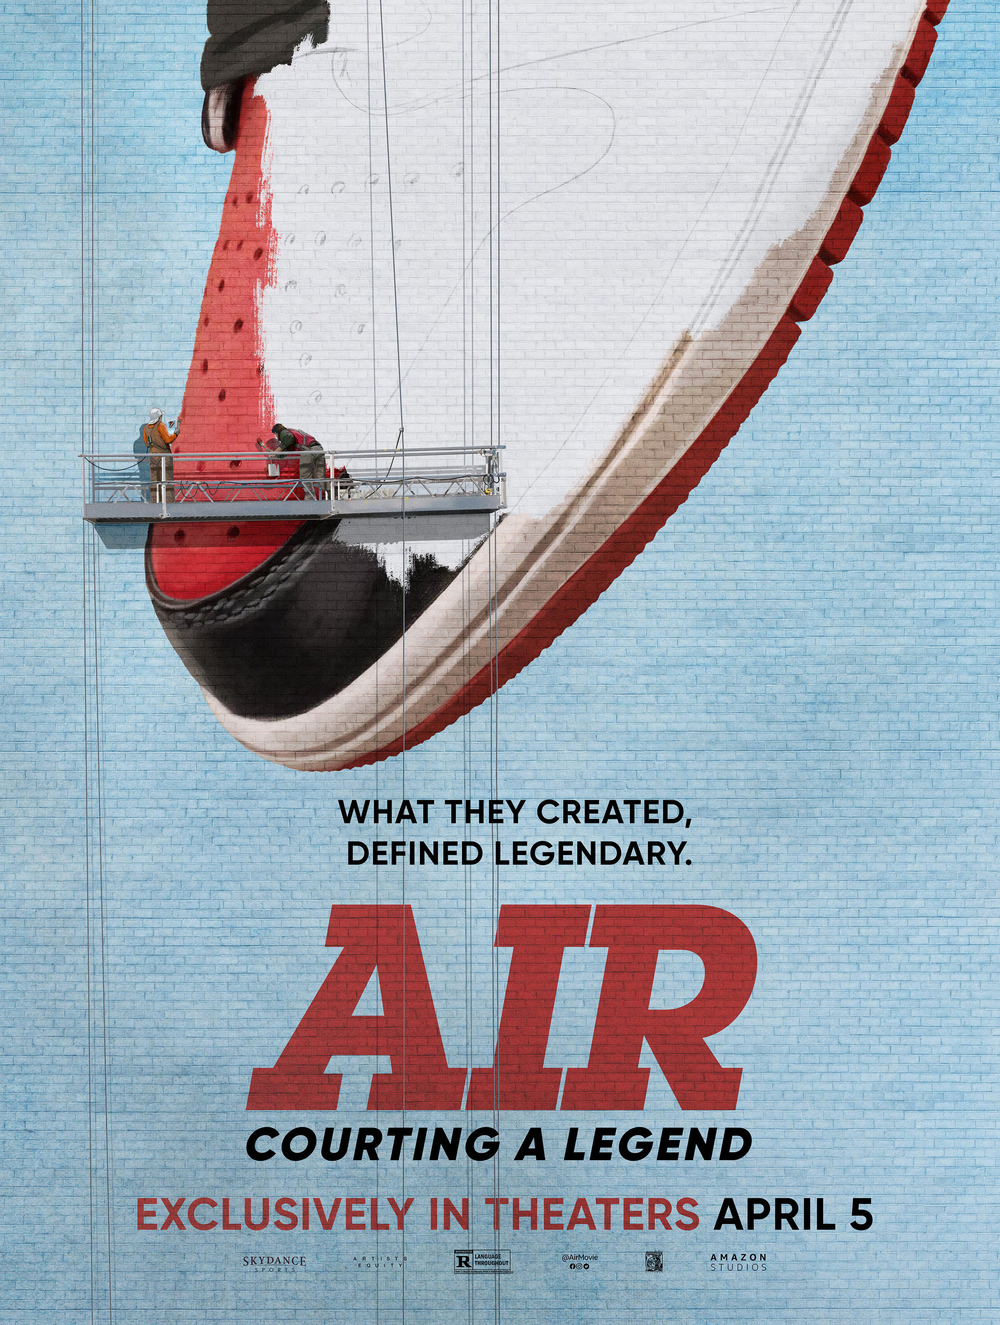 air movie review for parents